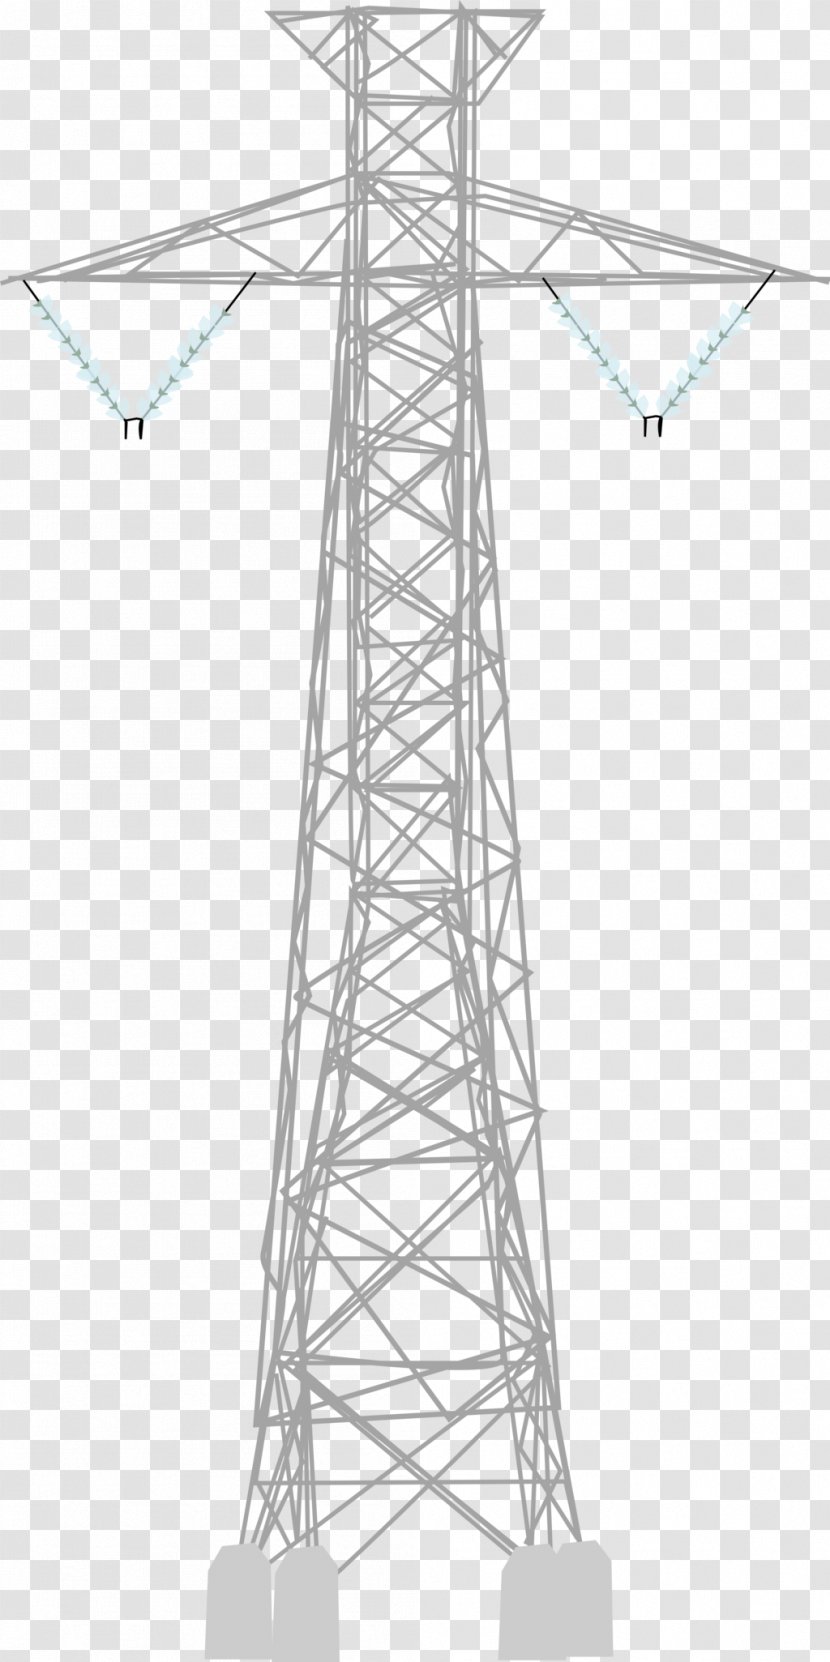 Electricity Overhead Power Line Transmission Tower Public Utility - Electric - High Voltage Transparent PNG